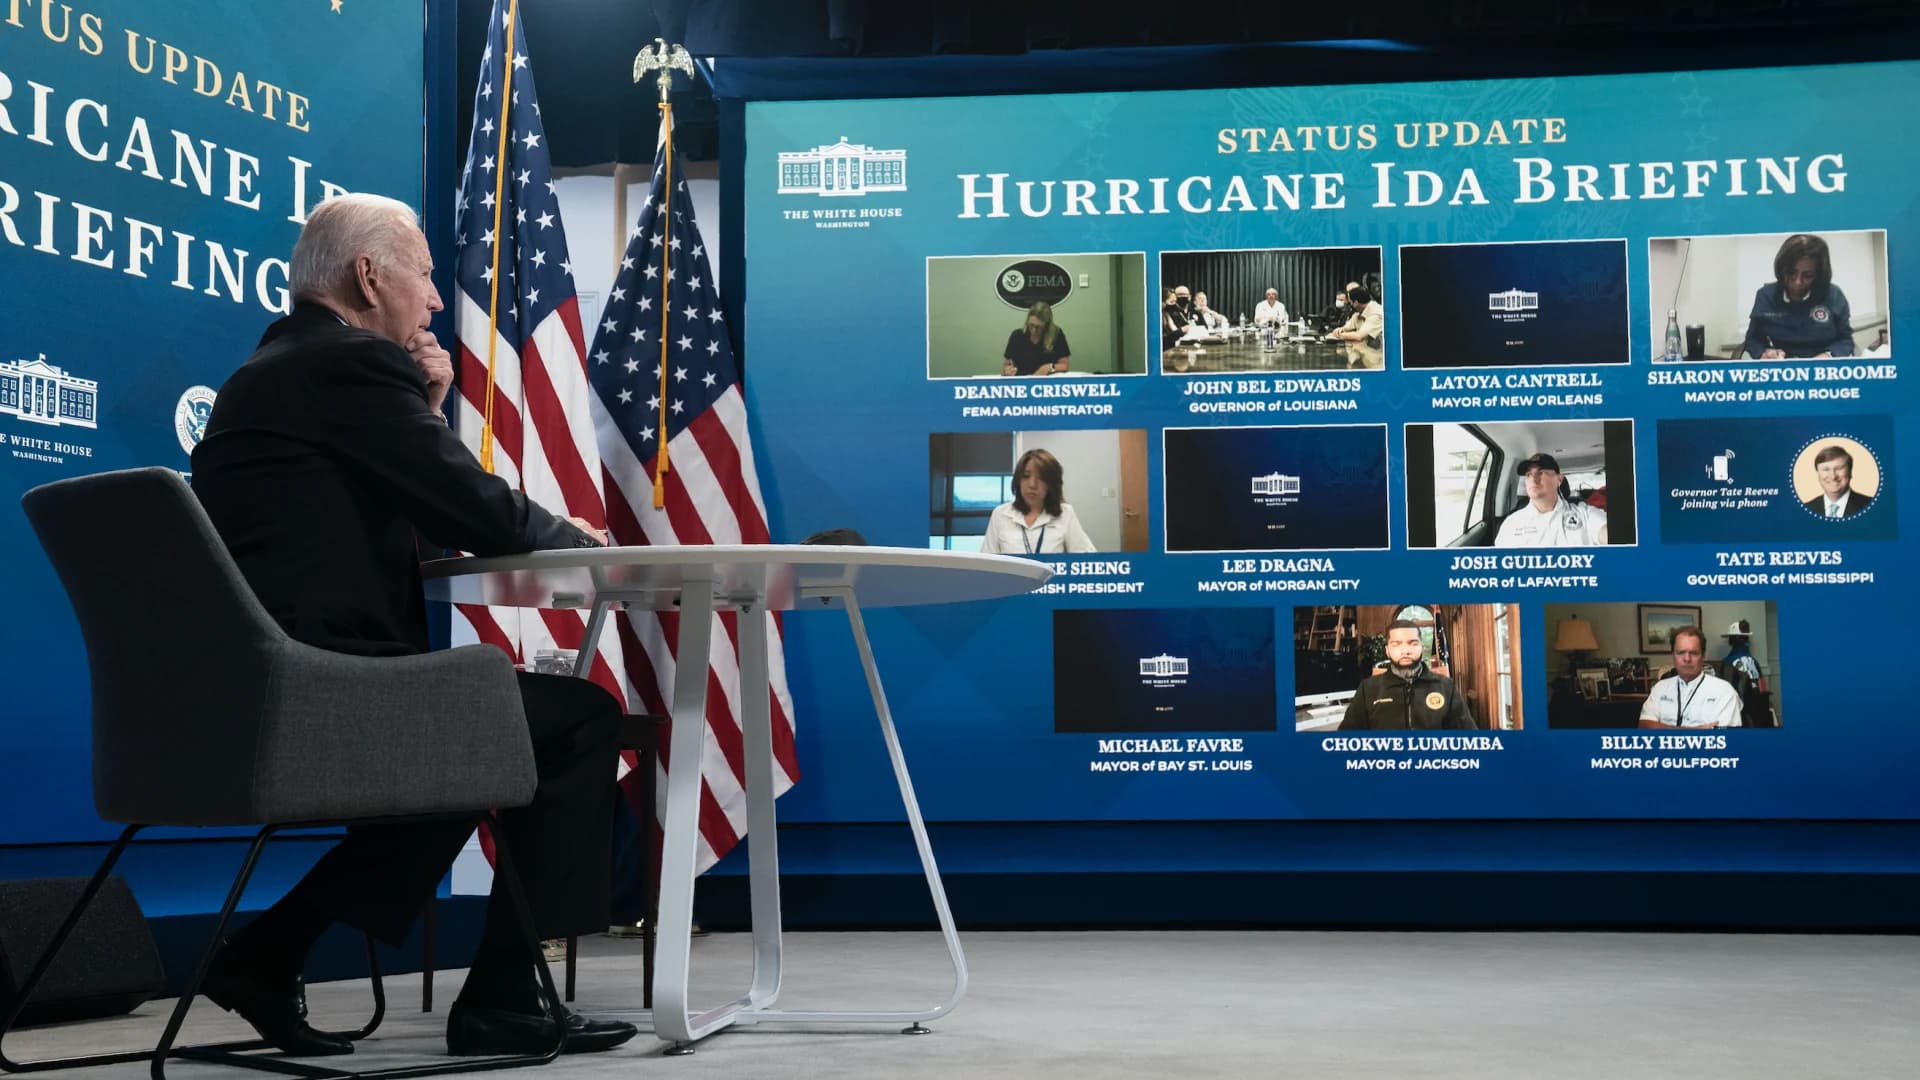 President Biden says states hardest-hit by Ida are resilient